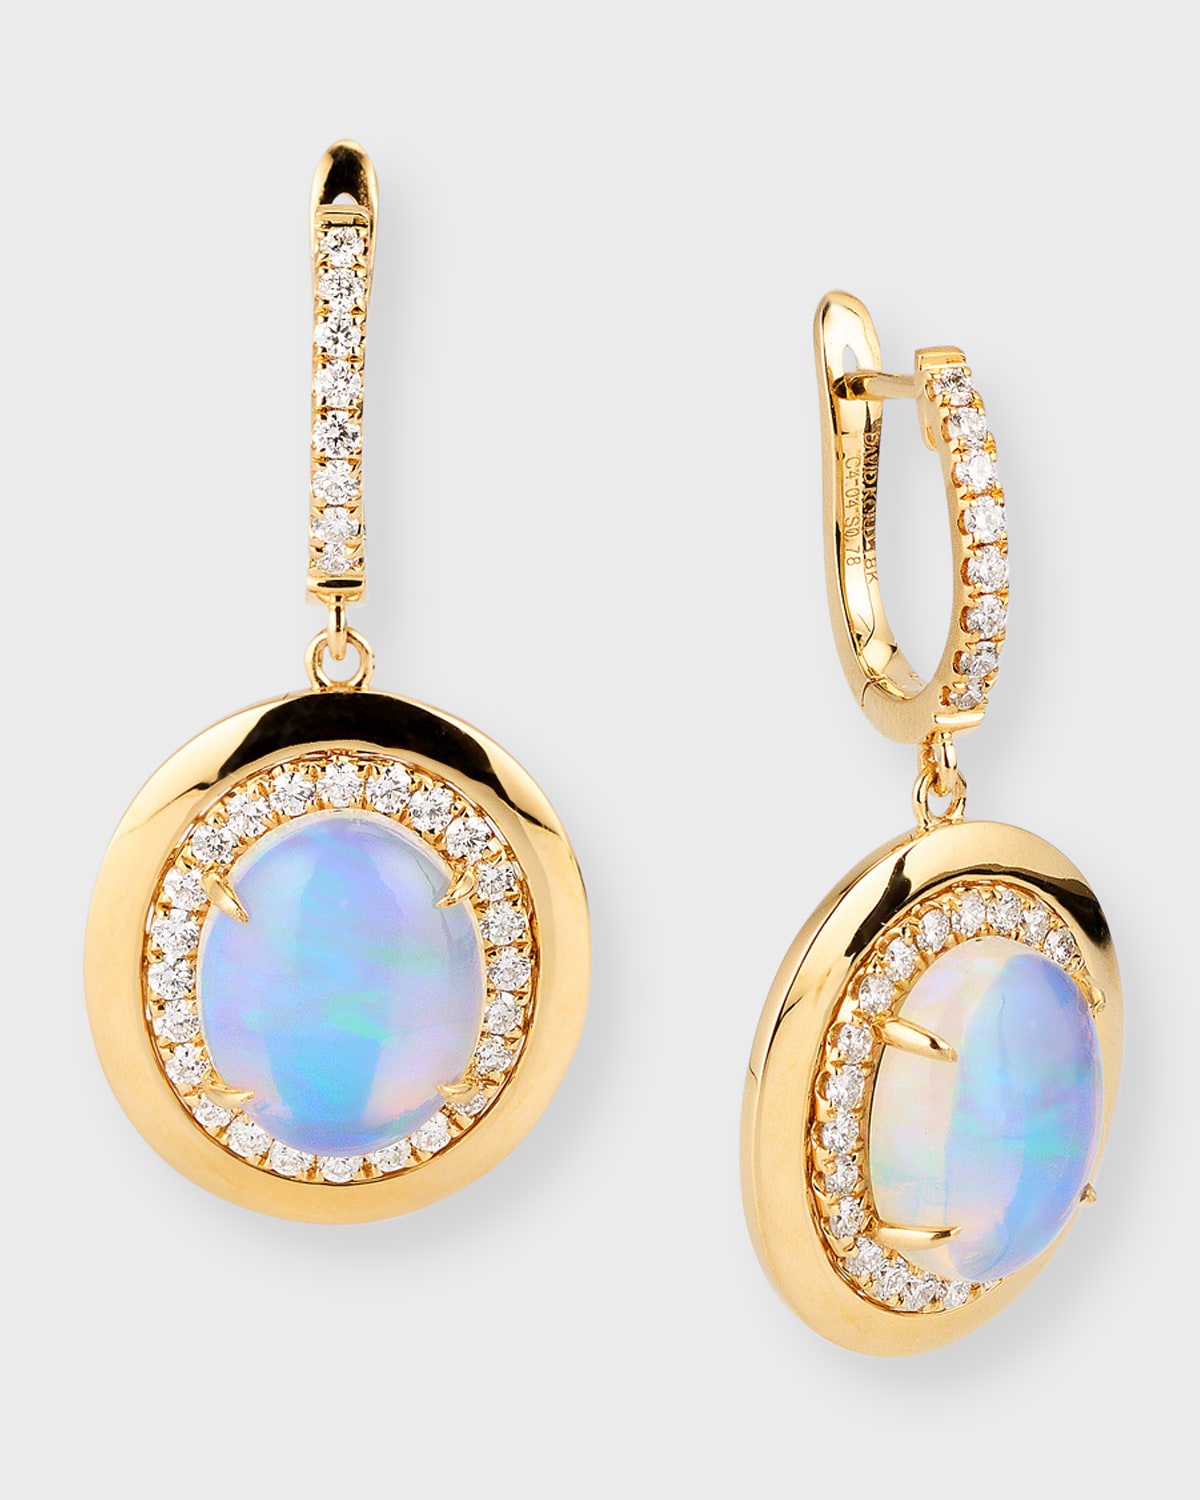 18K Yellow Gold Earrings with Oval-Shape Opal and Diamonds, 4.4tcw